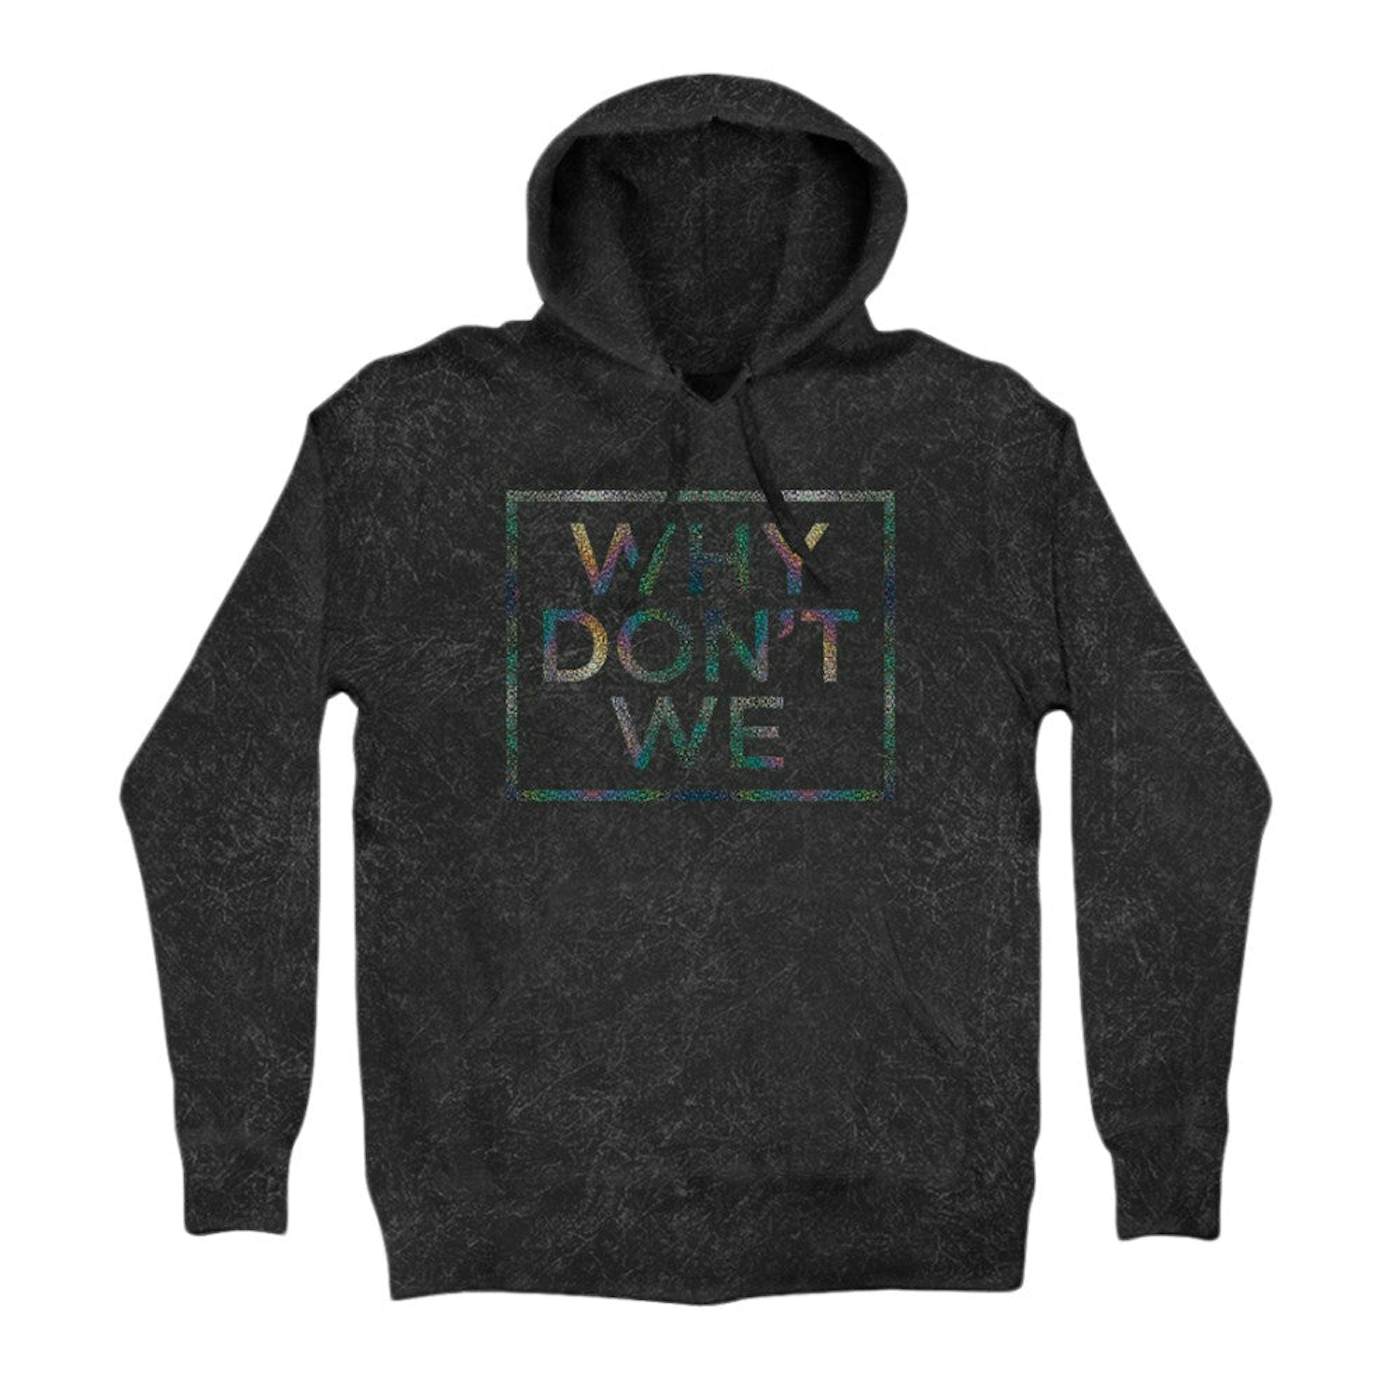 Why Don't We Black Friday Hoodie